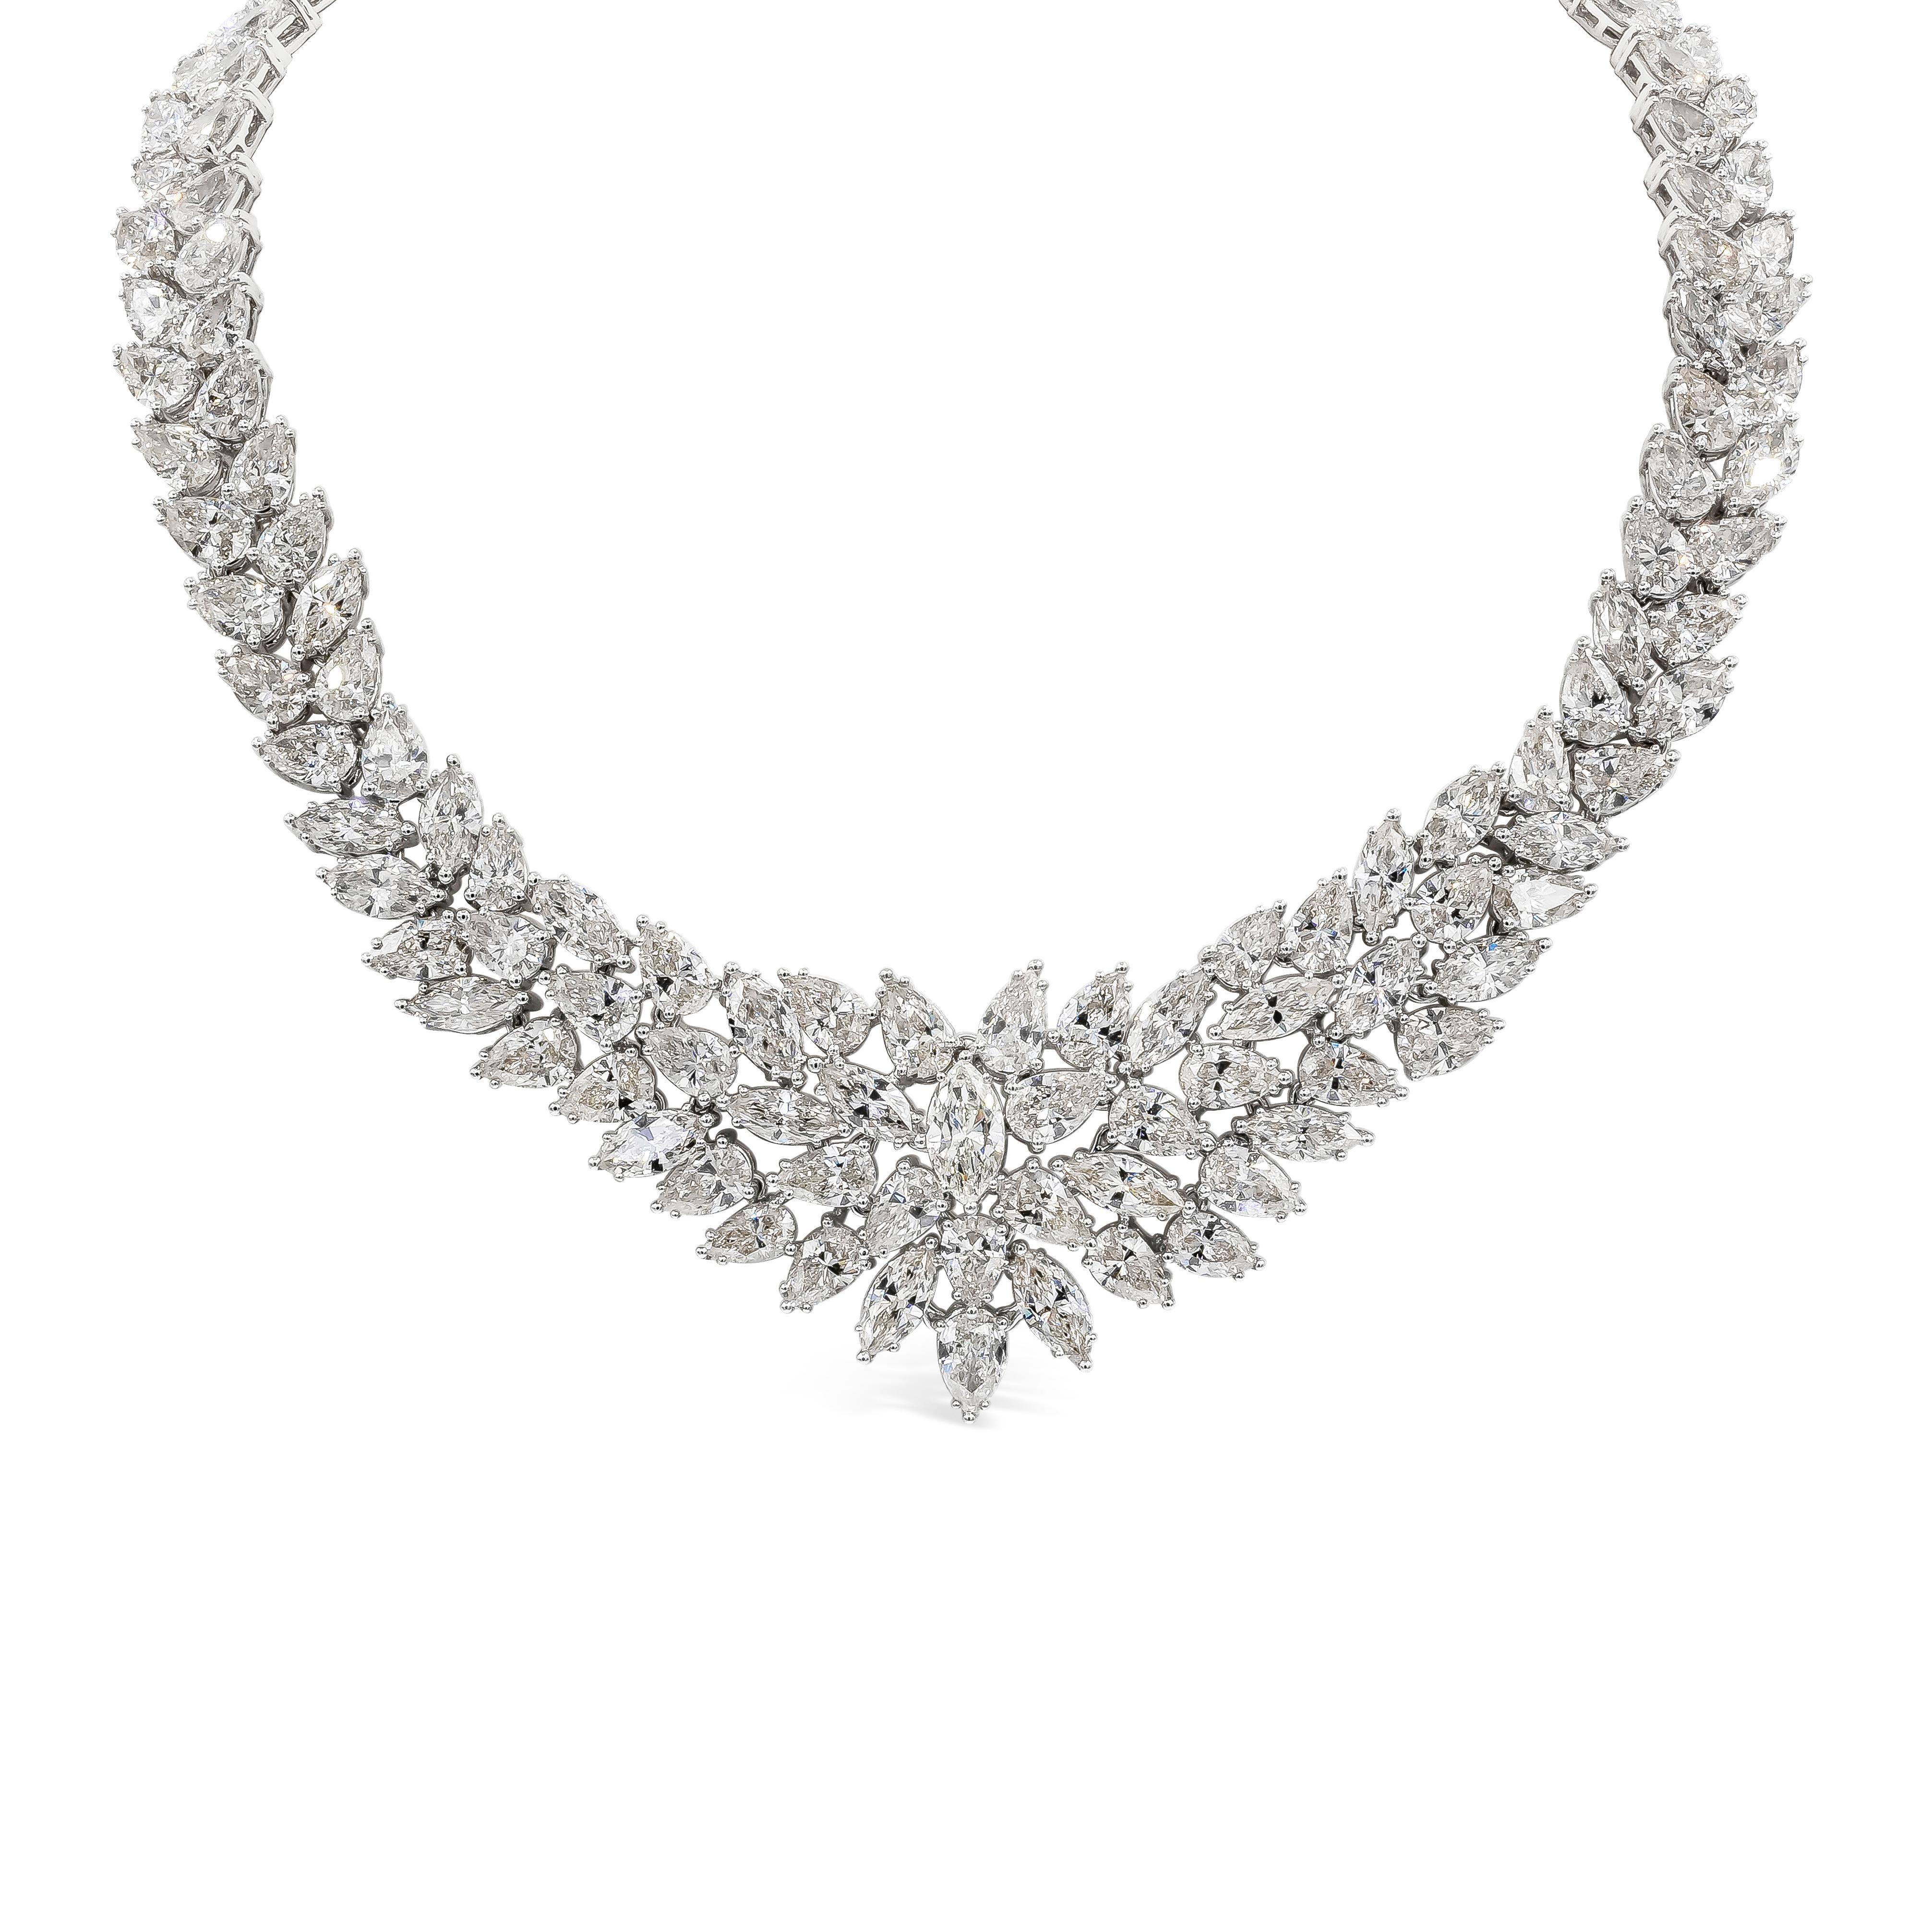 Luxurious and well crafted high end necklace showcasing mixed pear and marquise cut diamonds, set in an intricate and elegant open-work design. Diamonds weigh 115.20 carats total. Made in Platinum.